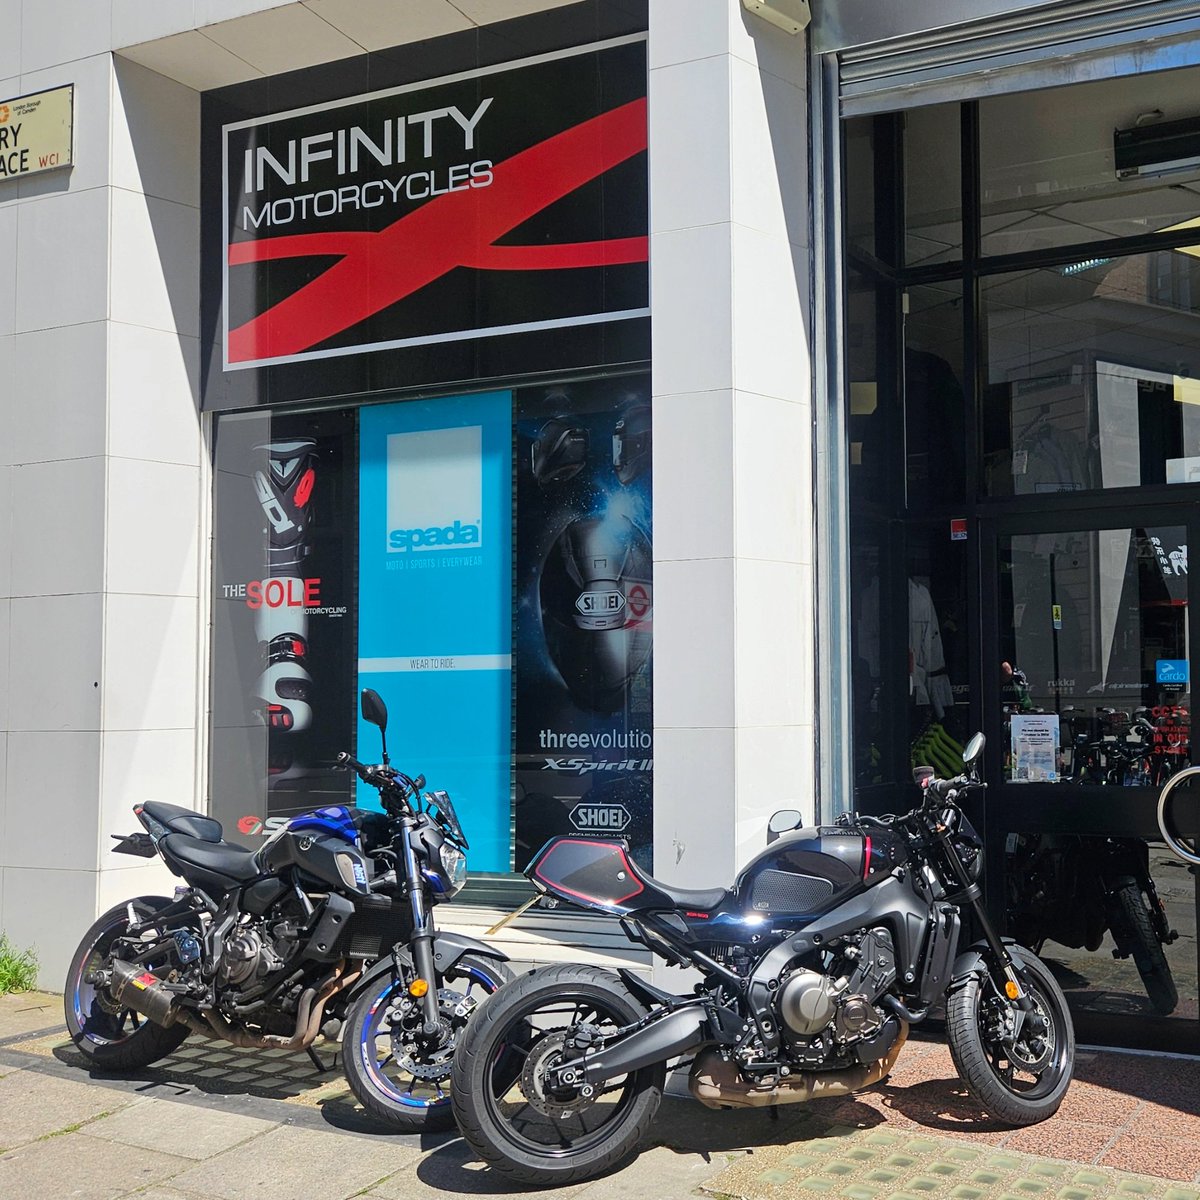 Bikes love an end-of-May Bank Holiday! 🏍️❤️ Where are you riding this extended weekend?

Don't forget, our 16 Infinity stores are open all weekend! If you need new gear, swing by from 10am-5pm (Chiswick closes at 4:00 pm).

Find your nearest store here 👉 bit.ly/4atteig